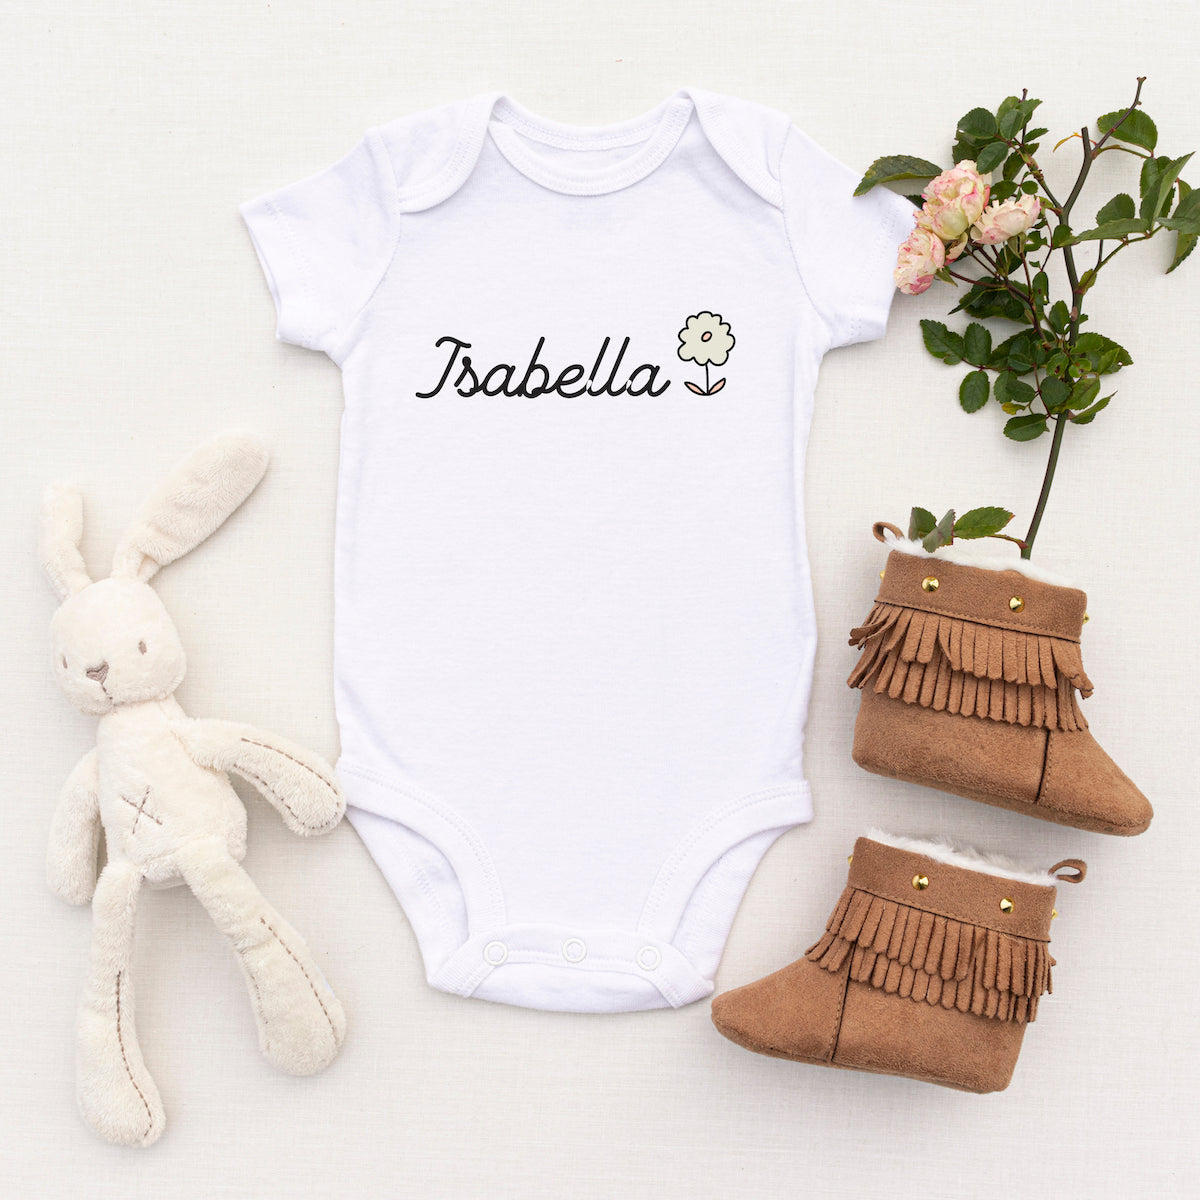 Personalised White Baby Body Suit Grow Vest - New-born